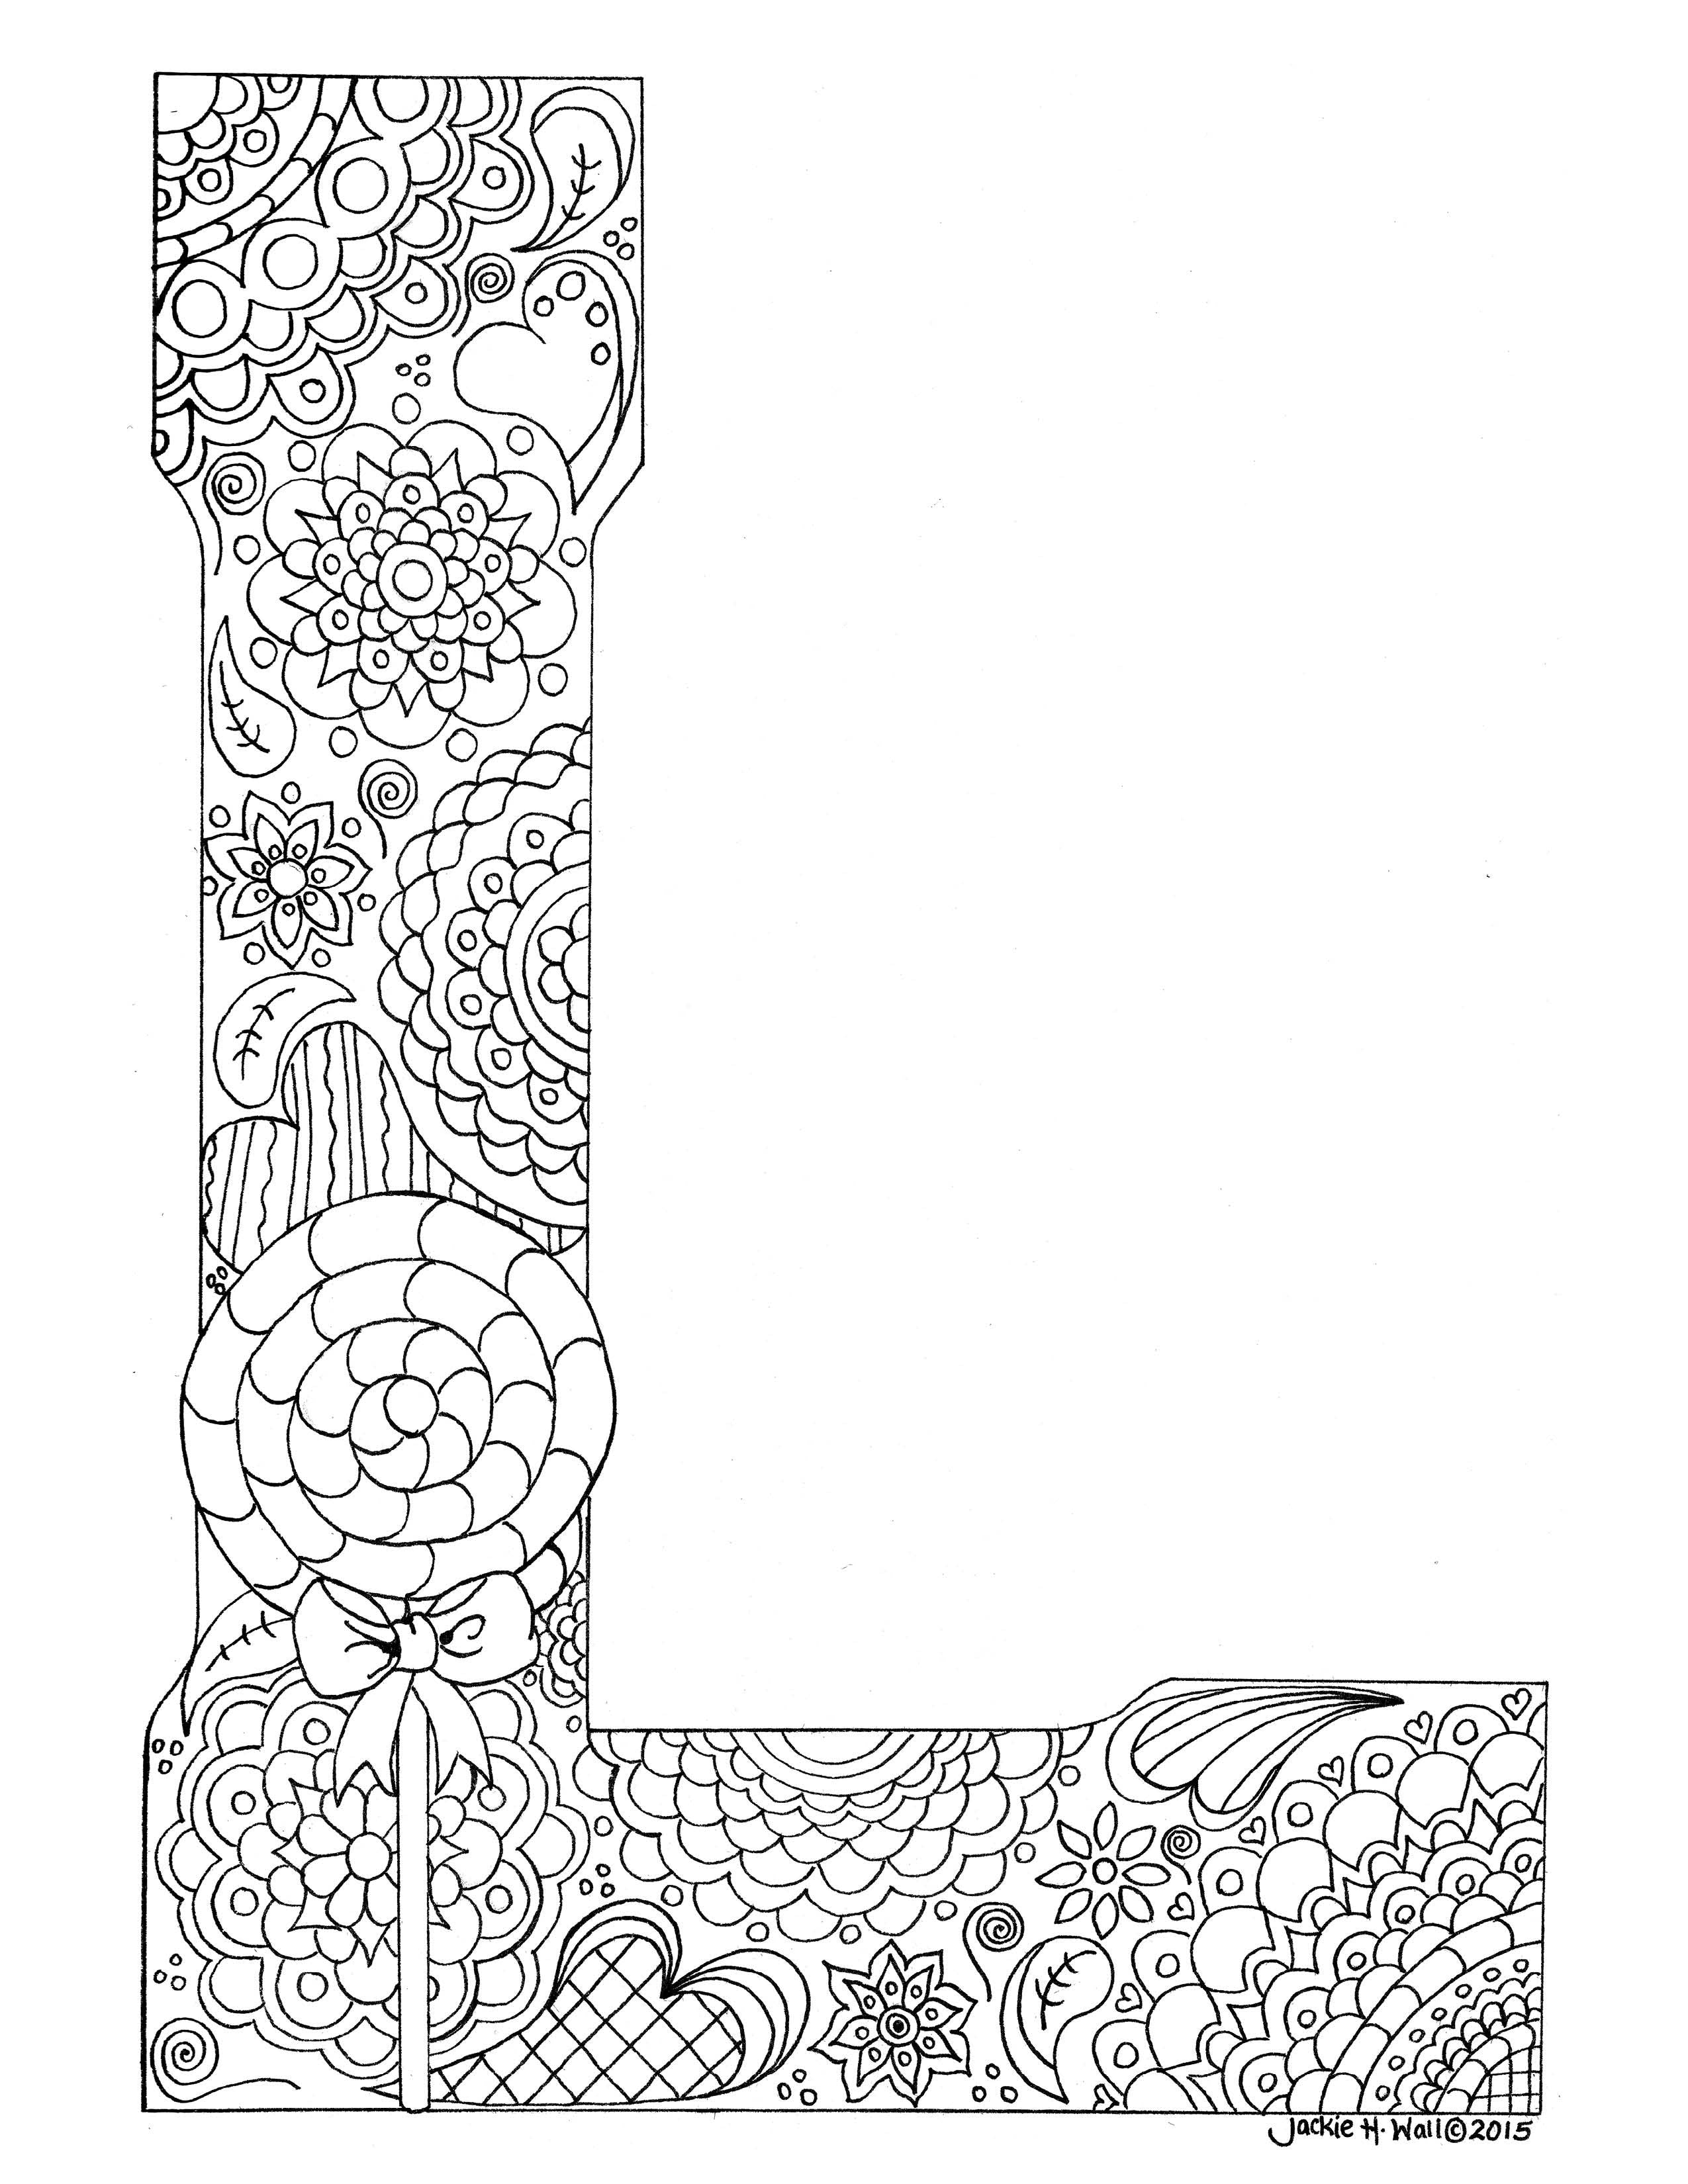 Download Letter L Colouring Page - Jackie Wall Studio